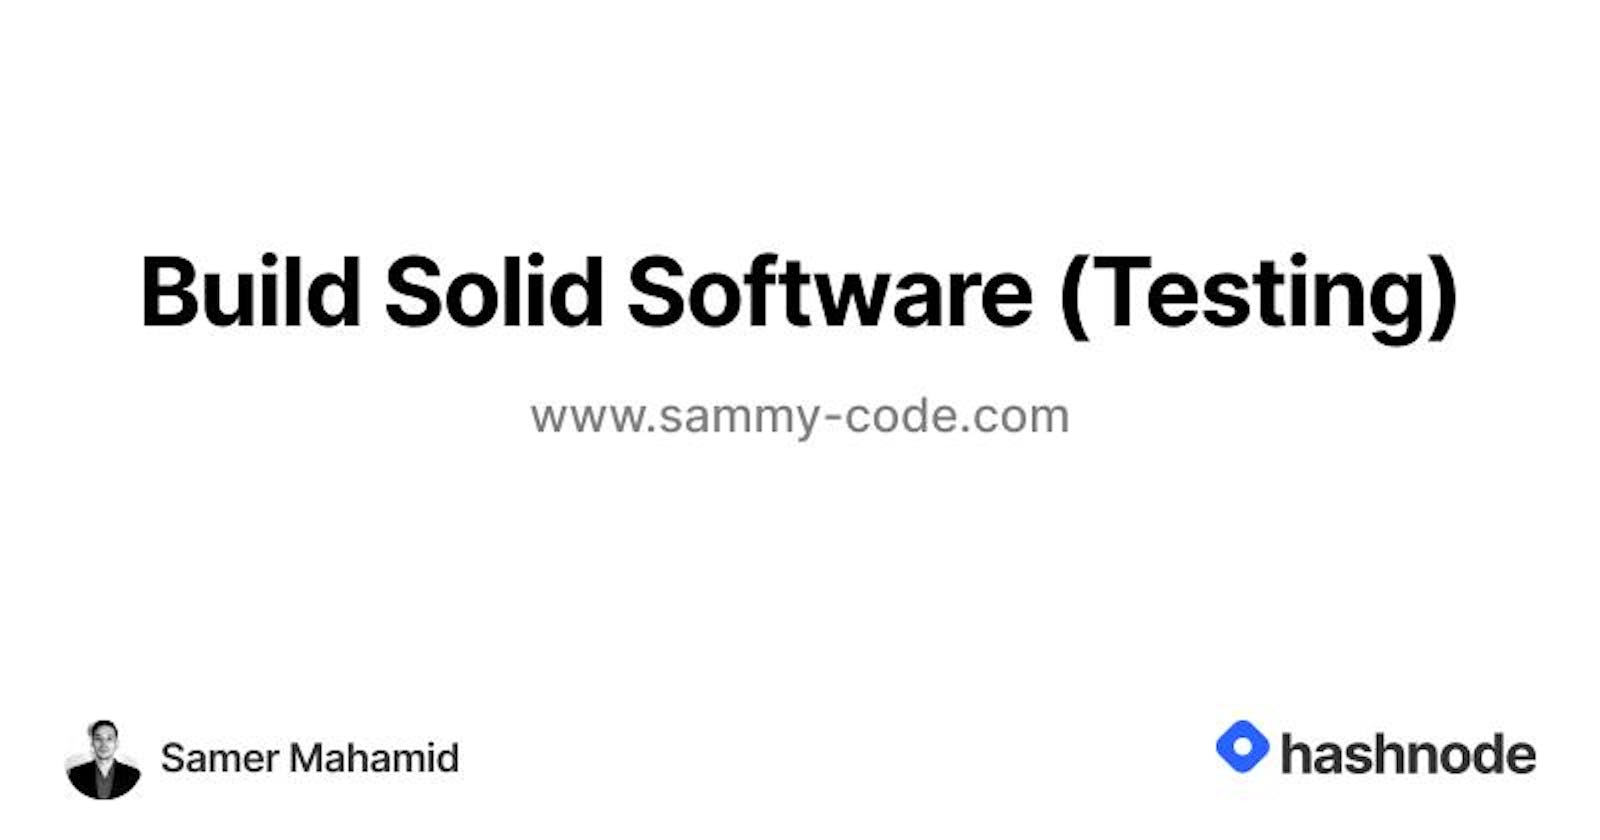 Build Solid Software (Testing)